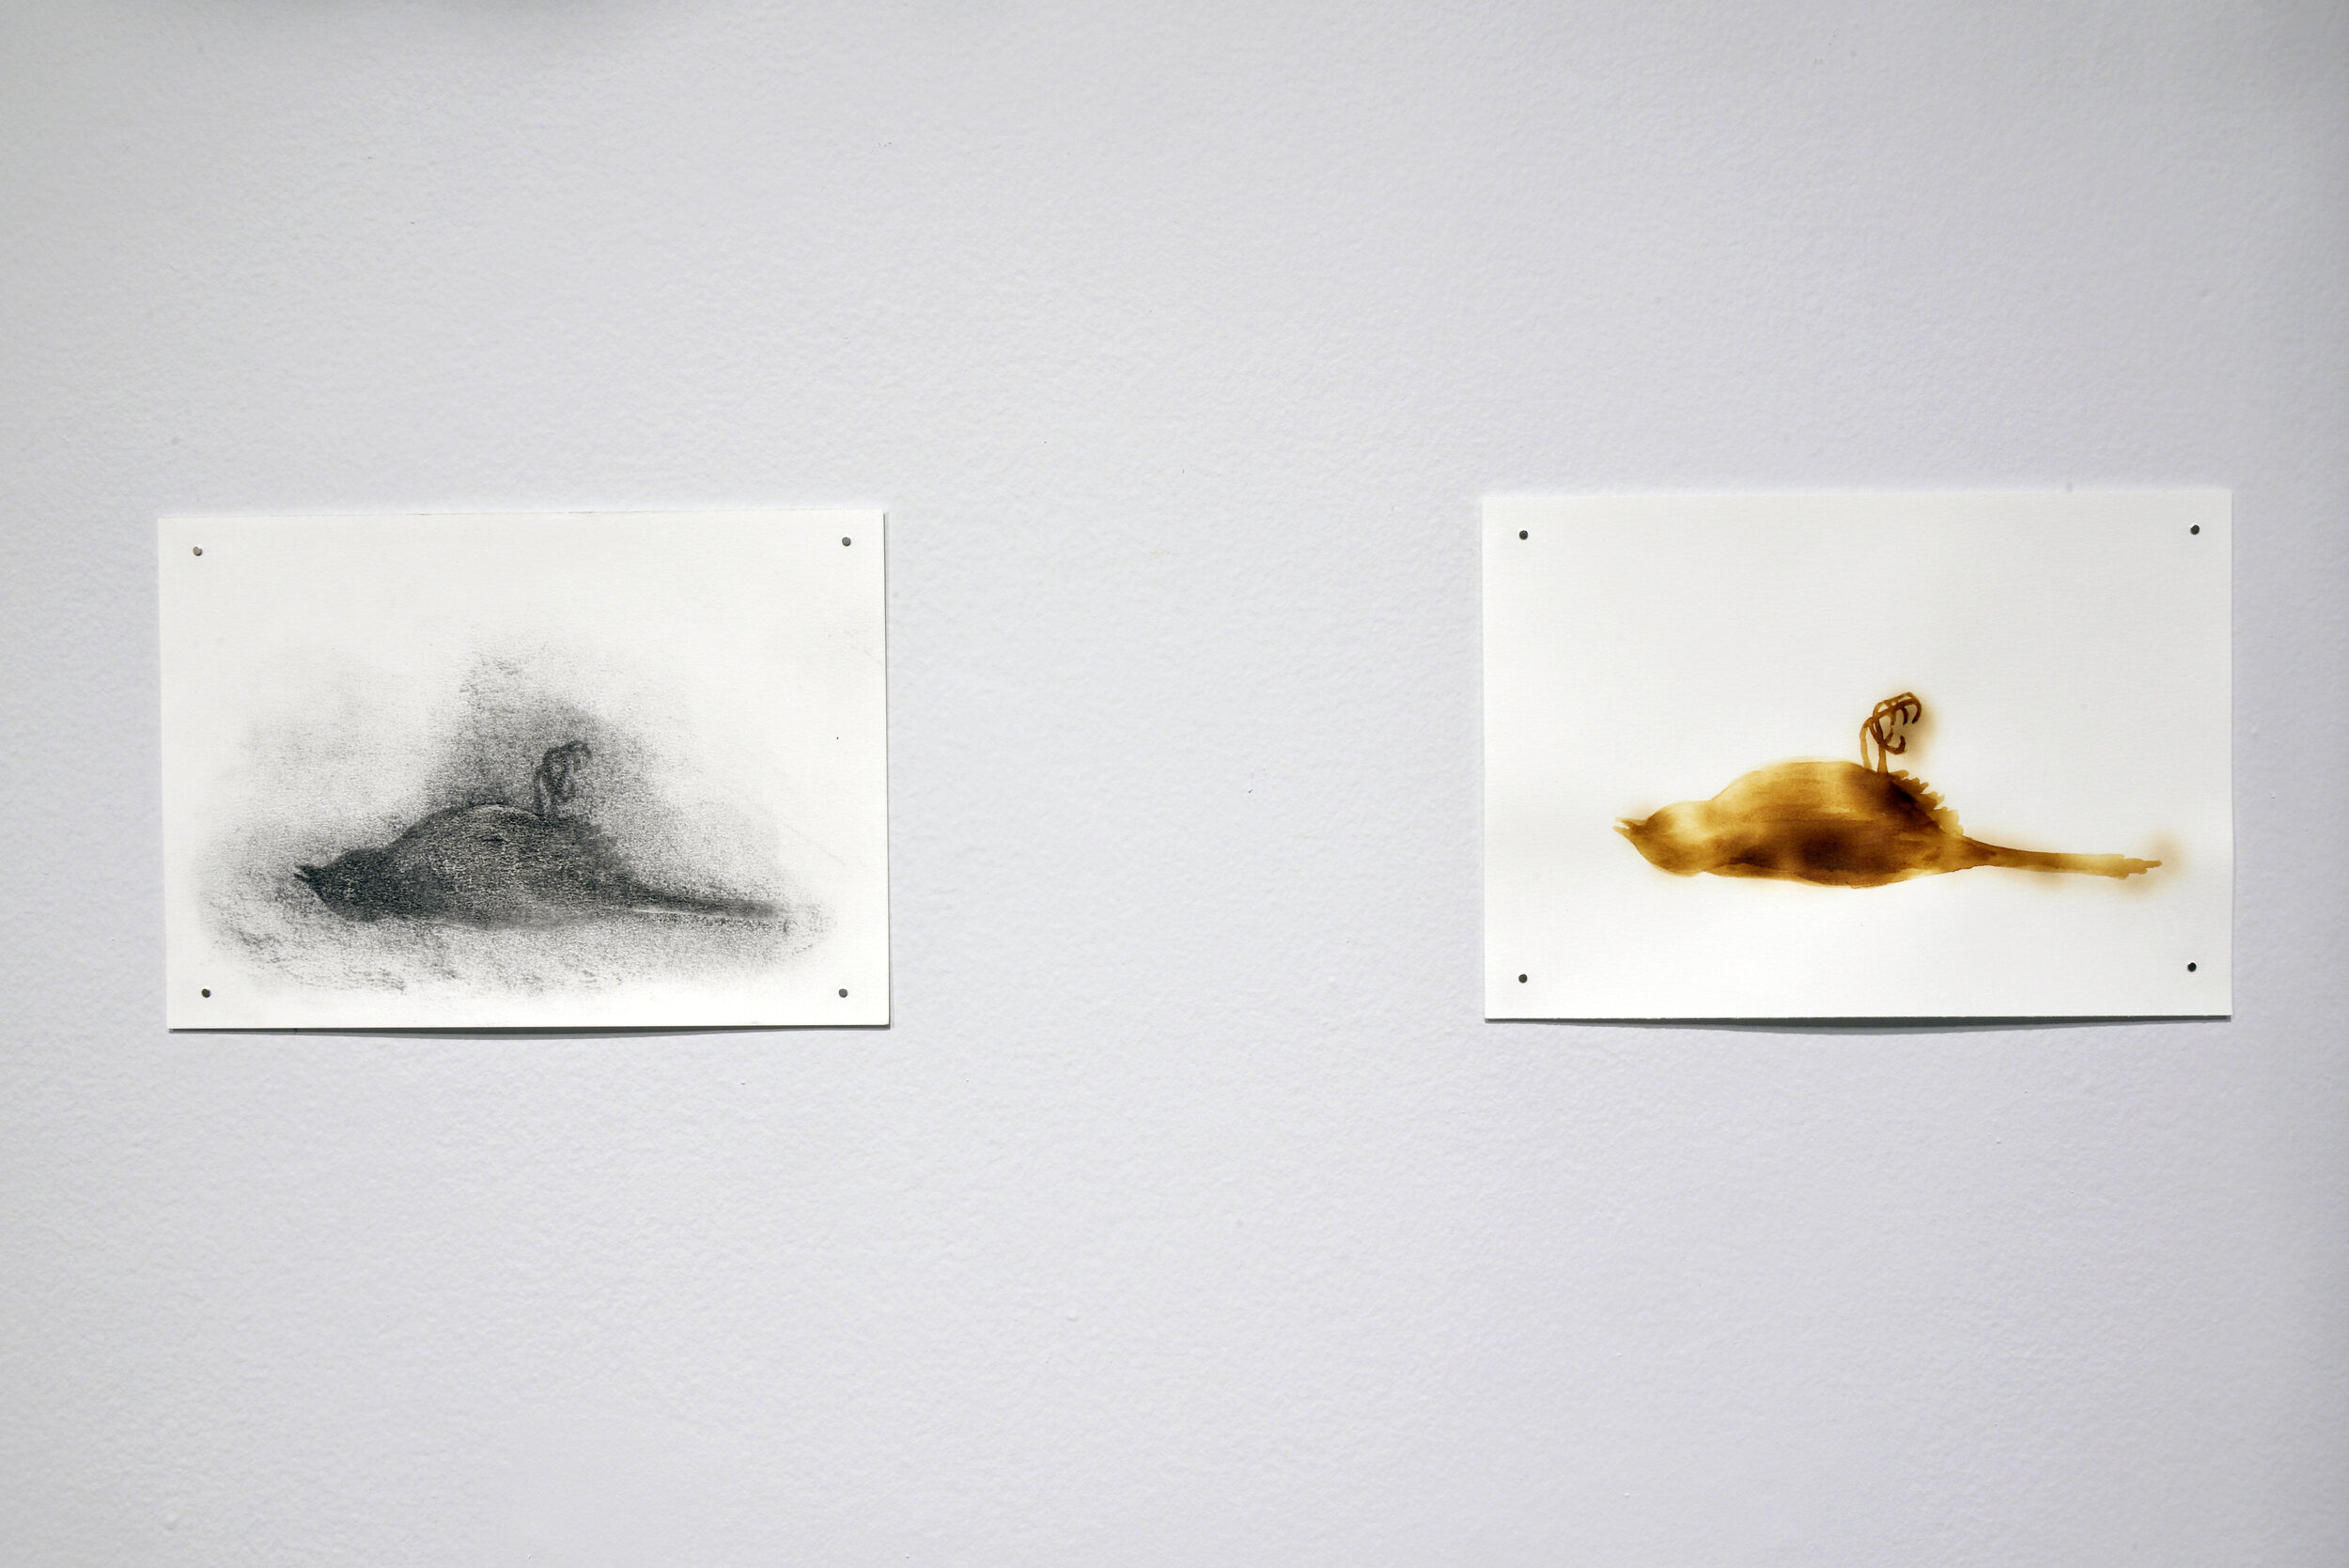  Alana Bartol,  Canaries Awaiting Resuscitation , 2020, milk and charcoal on paper, heated milk on paper, original drawings. 